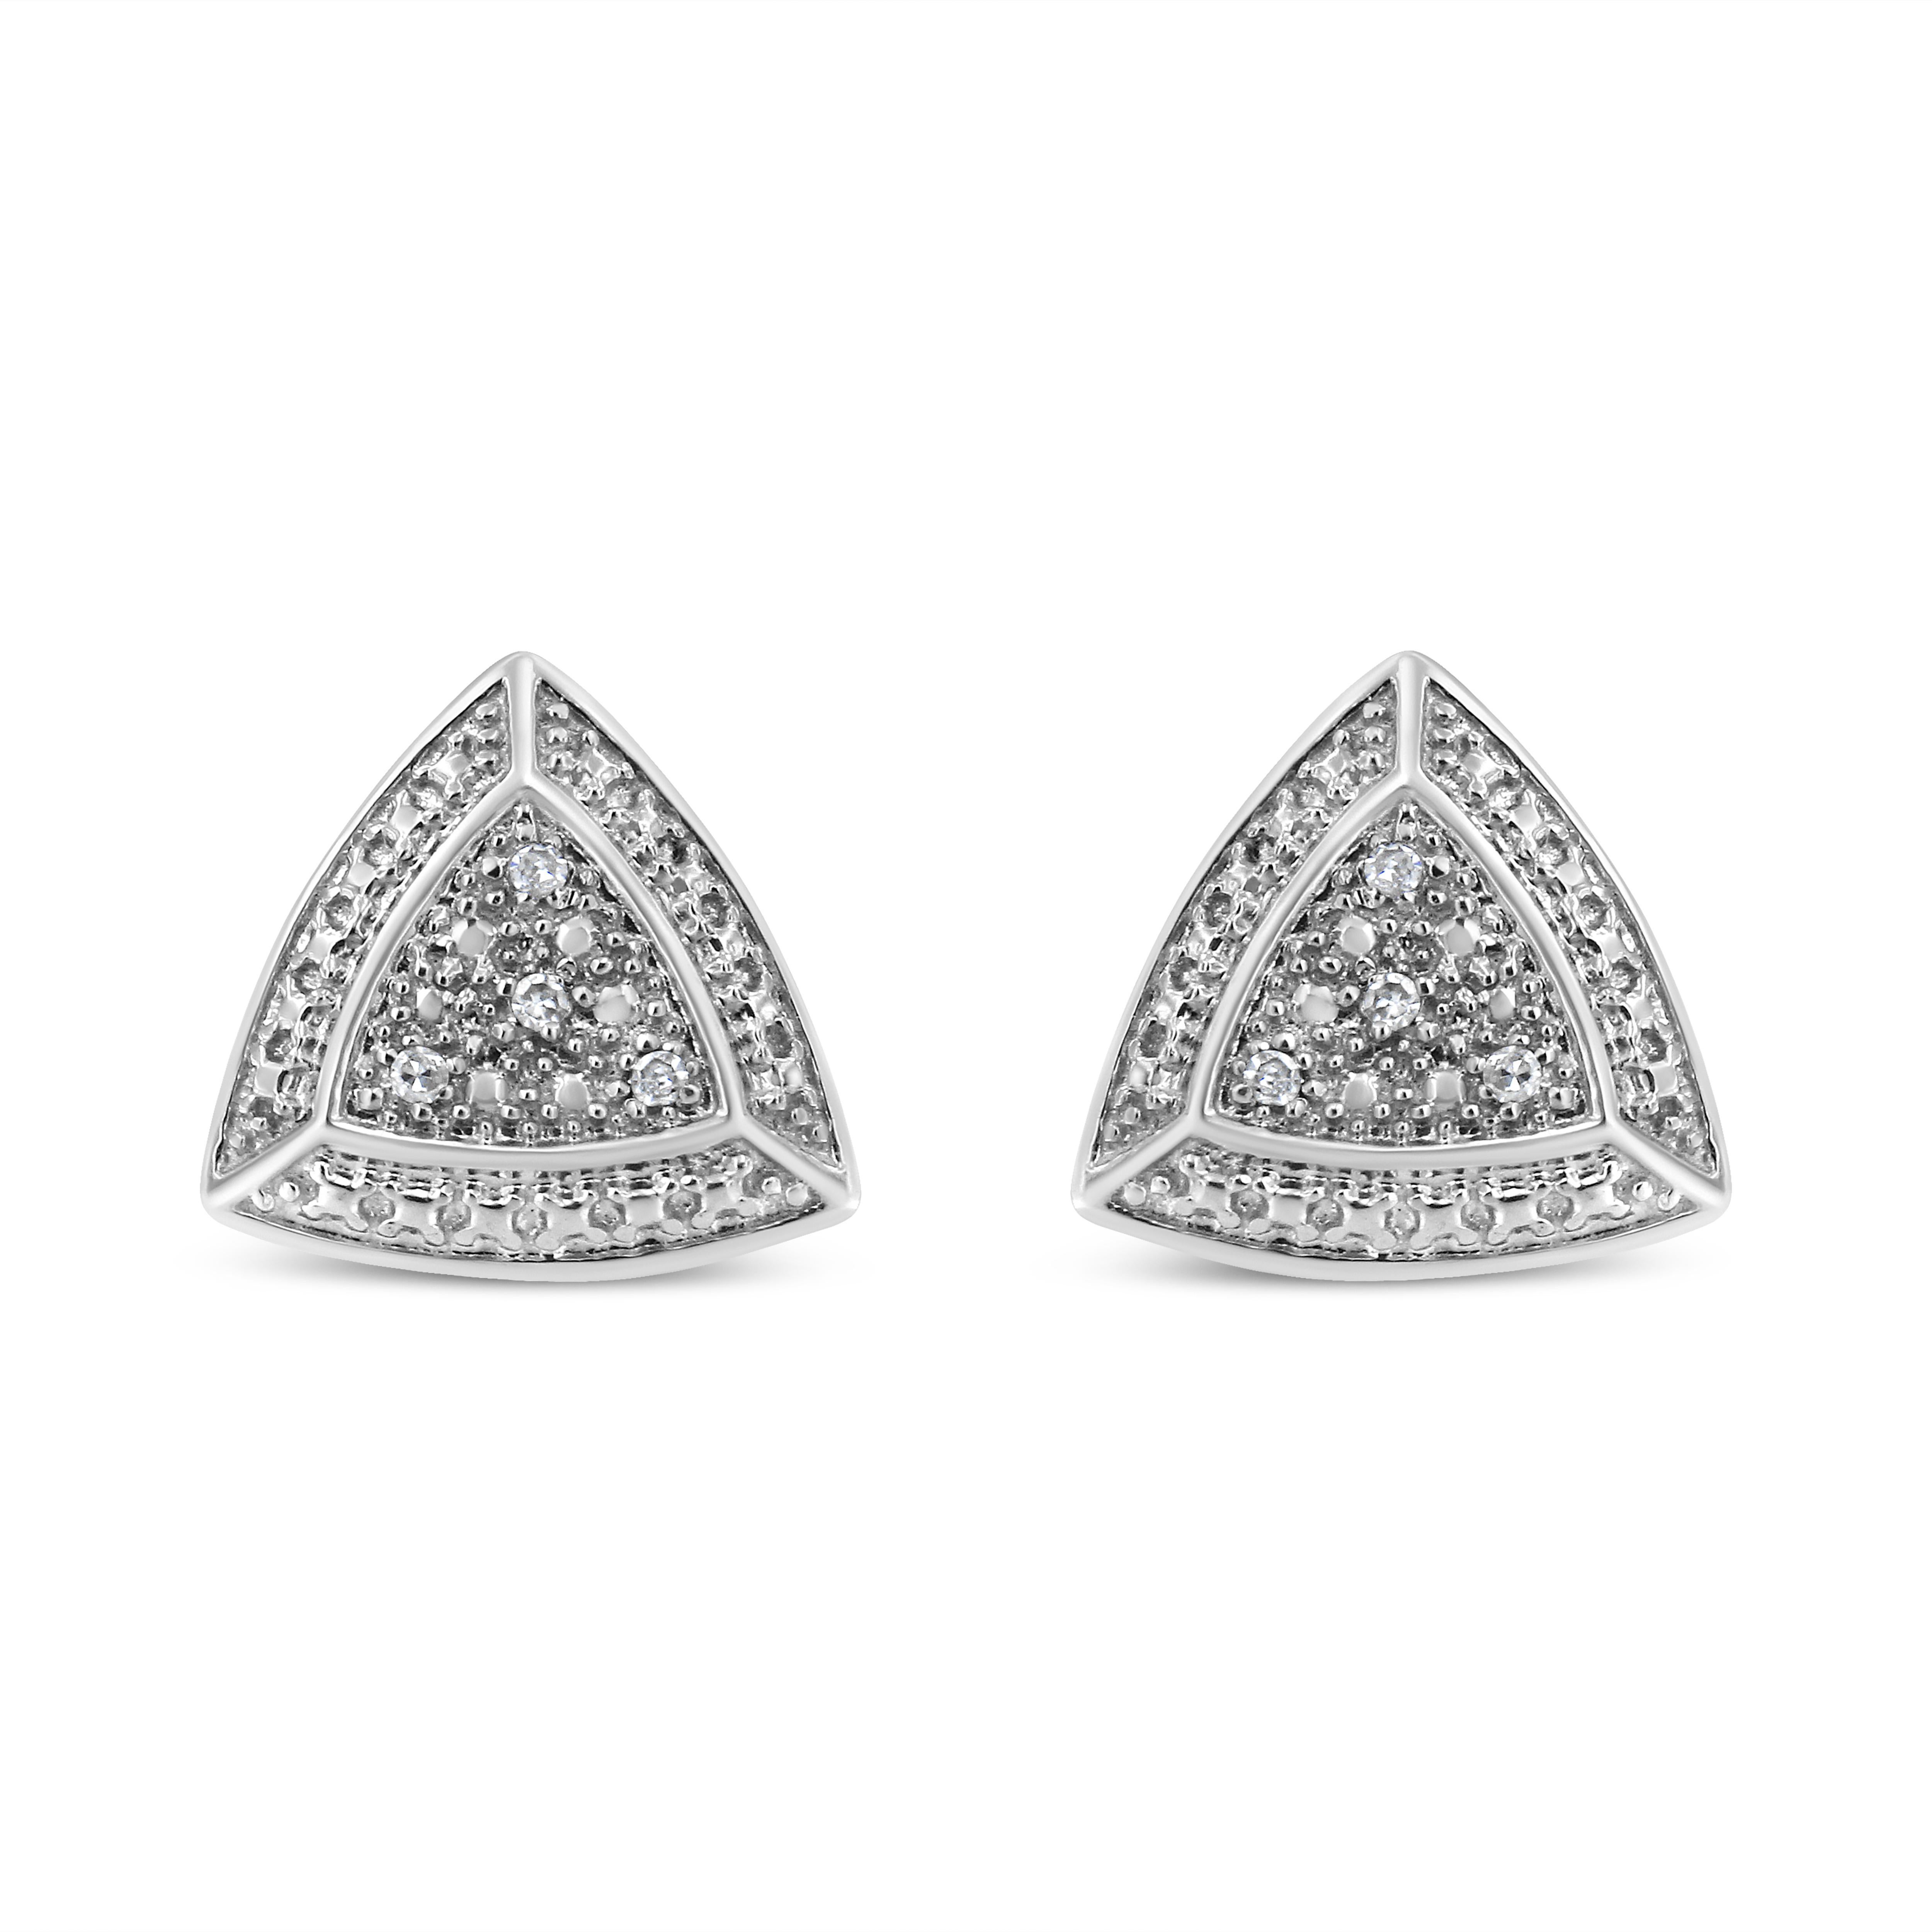 Elegant and timeless, these .925 sterling silver trillion shaped stud earrings feature four round, brilliant cut diamonds among ridged studs that mimic the appearance of diamonds. The earrings are slightly domed and have a 3D border around more